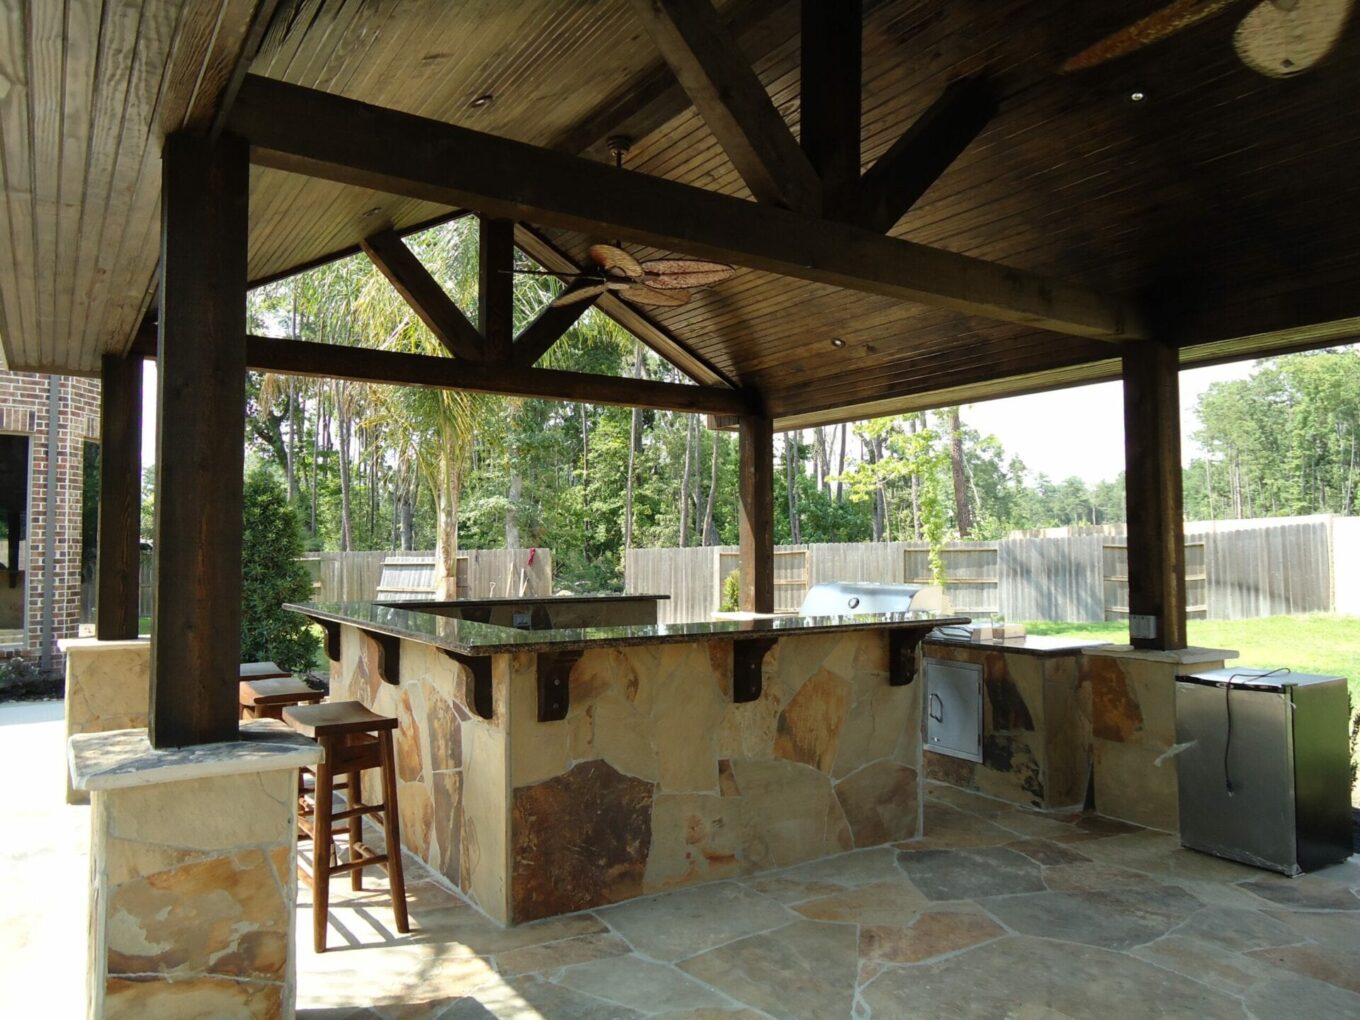 A stone outdoor kitchen with an open roof.